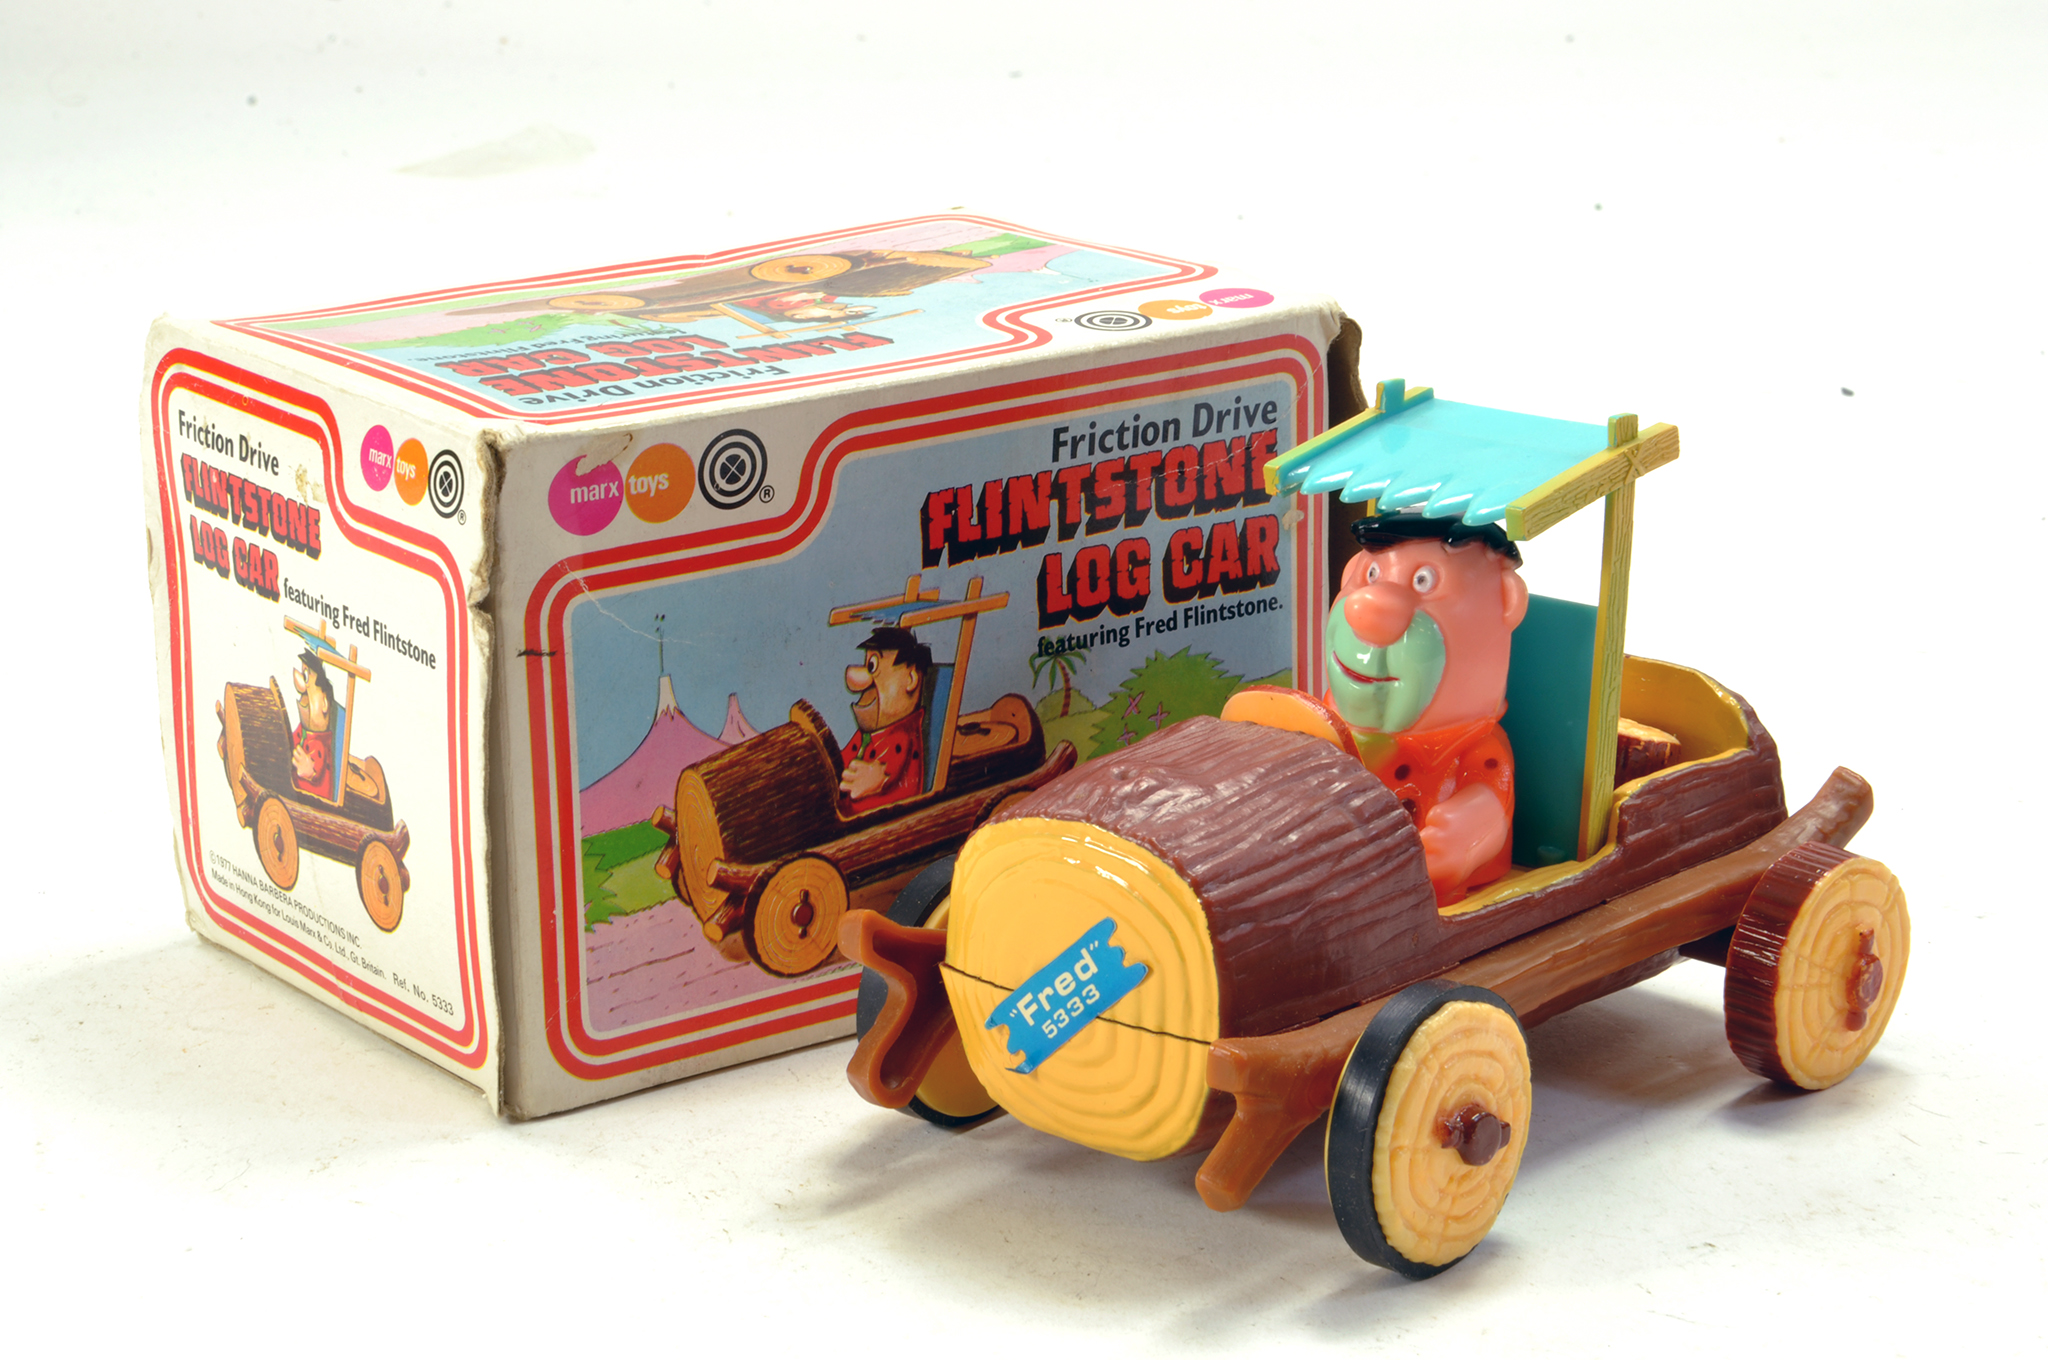 Marx Toys Friction Driven Log Car as seen in the Flinstones, with Fred as driver. Rare Toy is